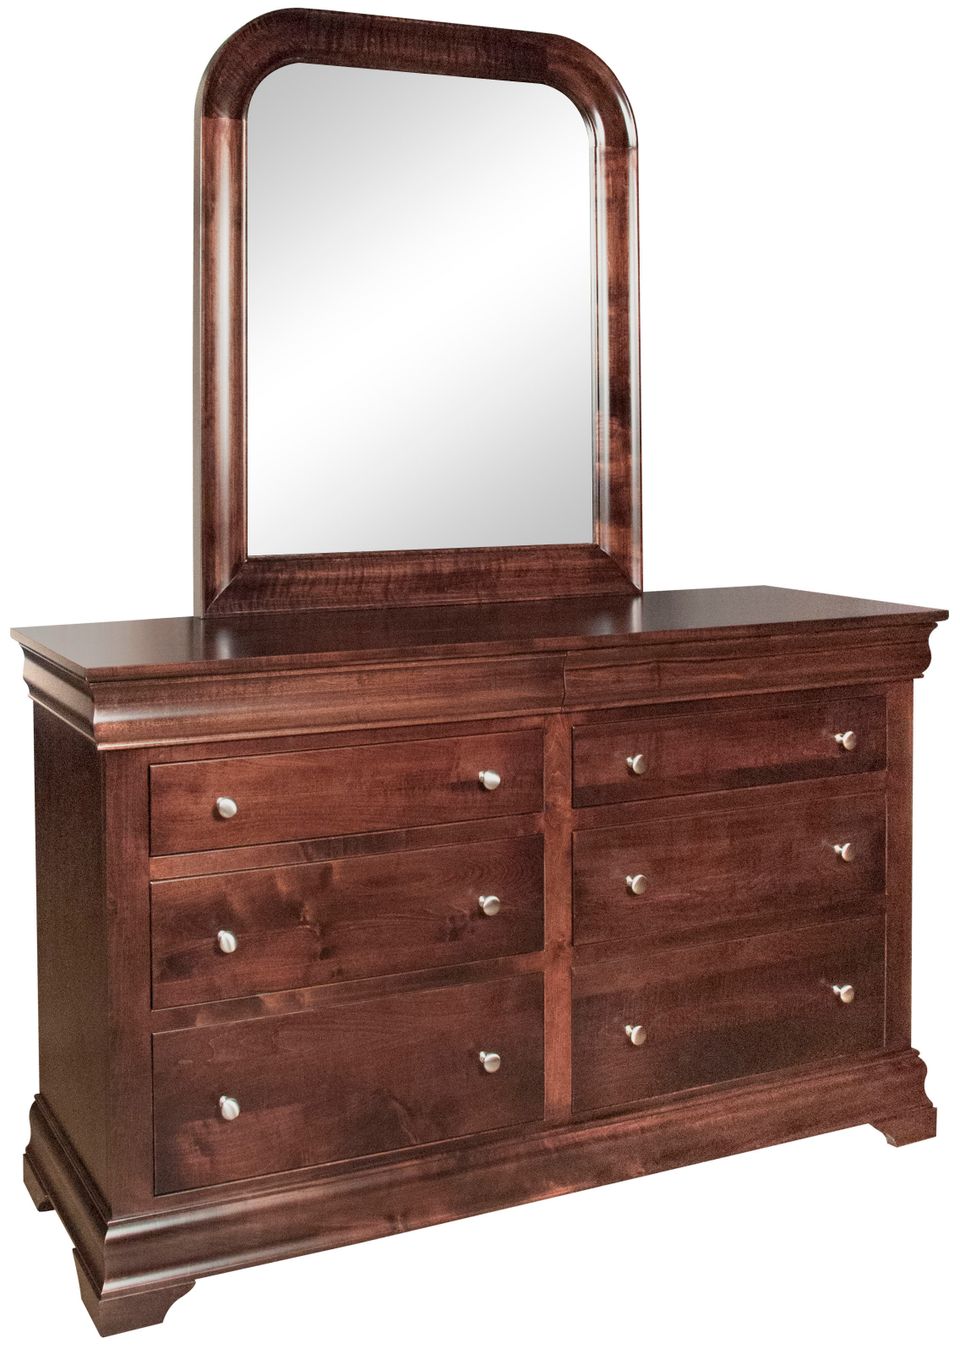 Aw loretto dresser with rounded mirror